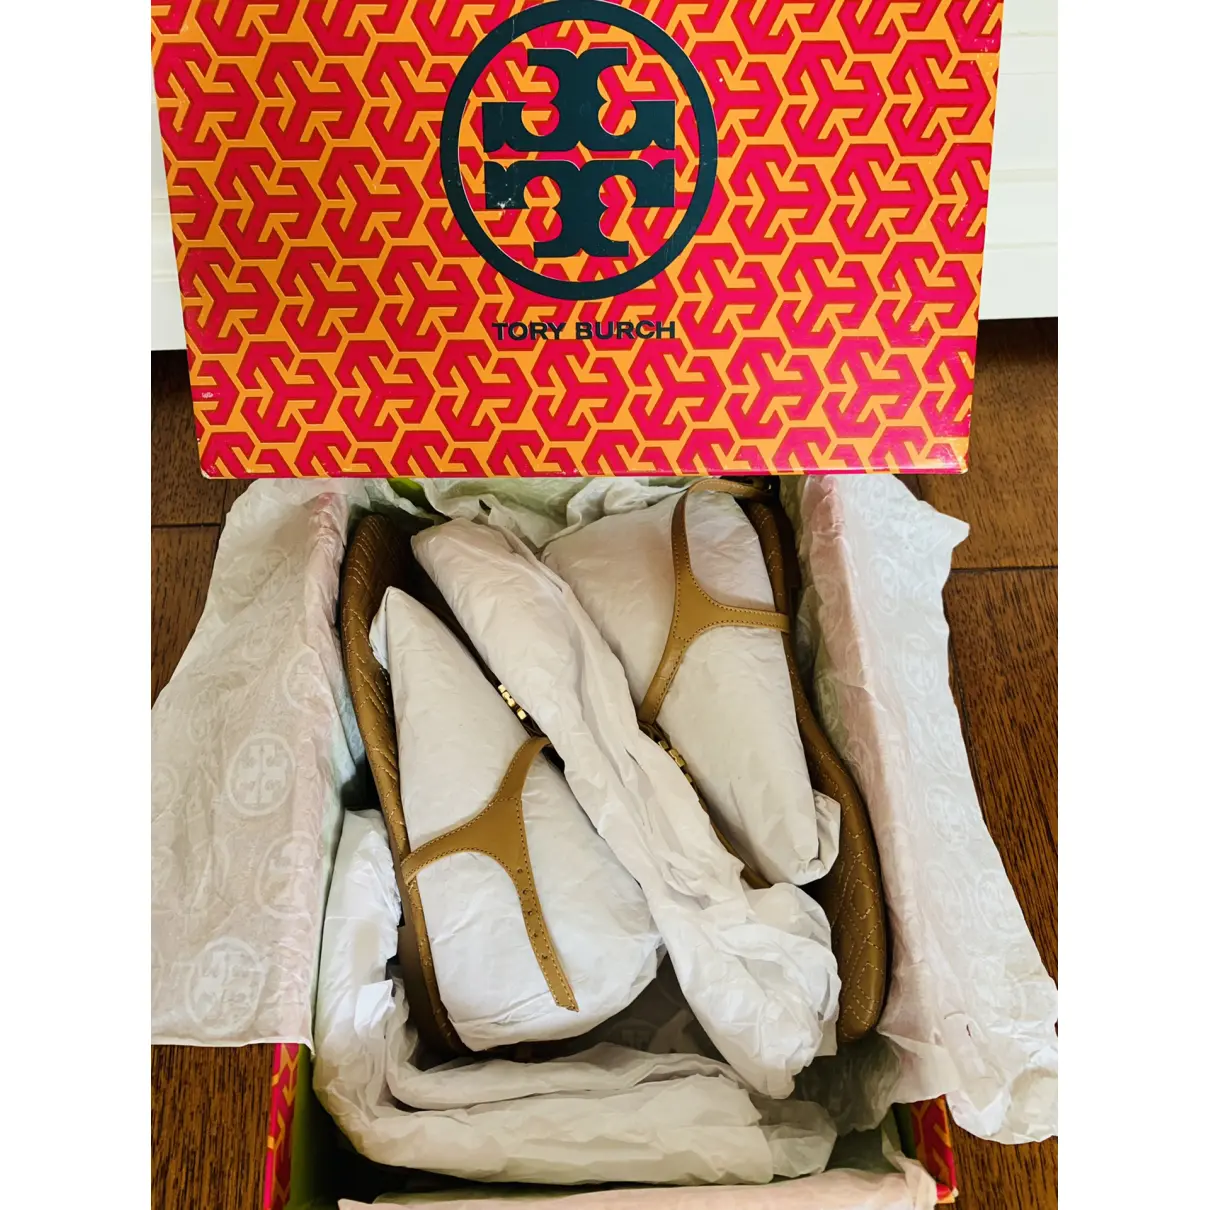 Buy Tory Burch Leather sandal online